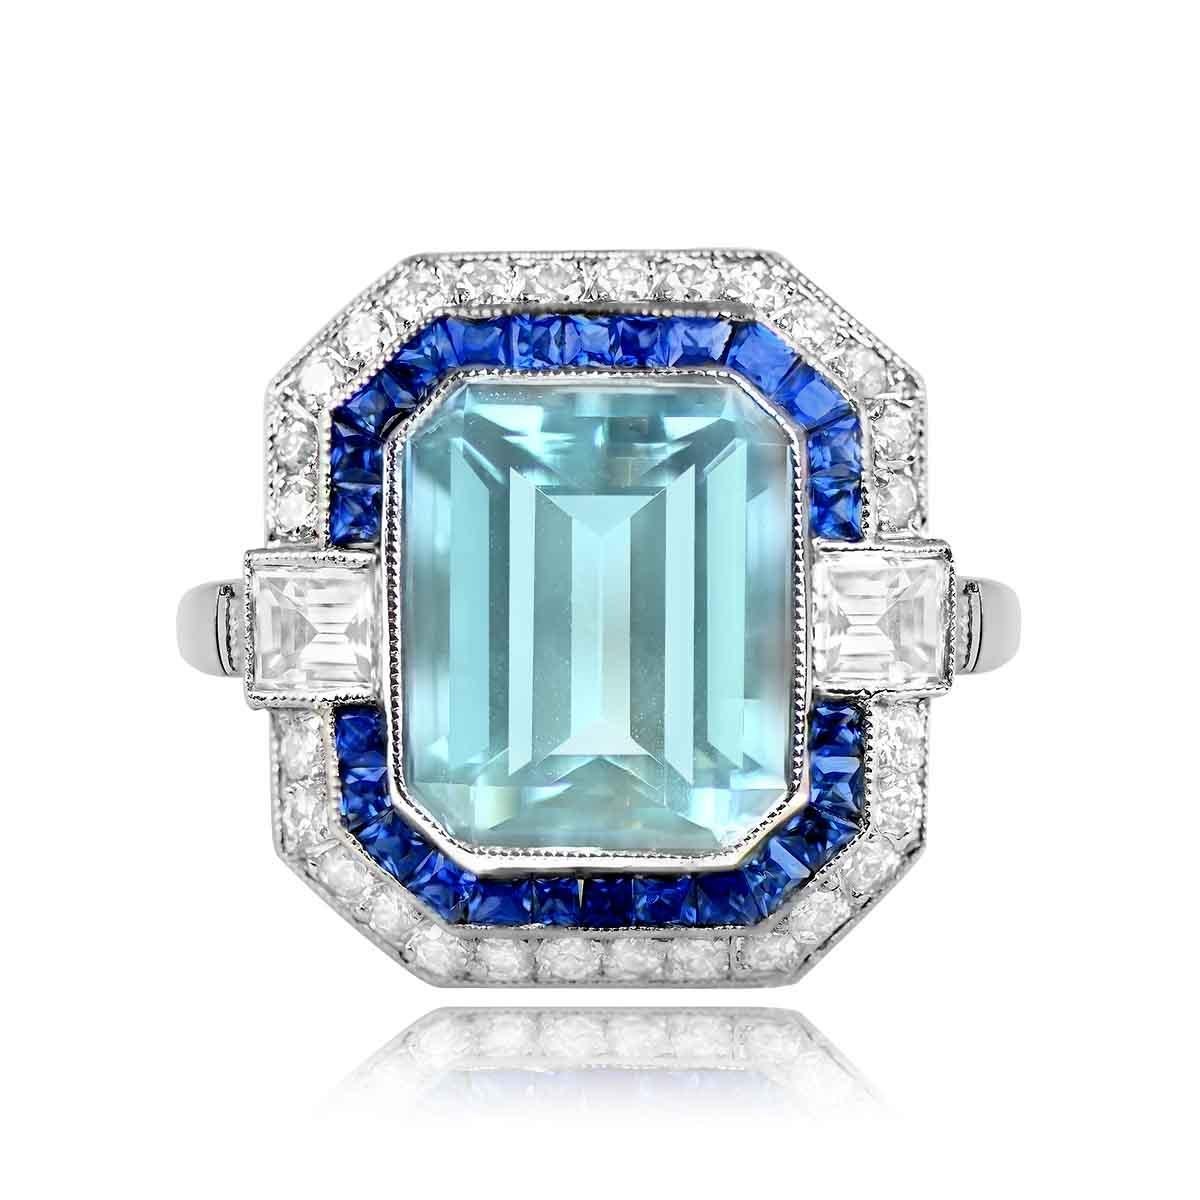 A breathtaking geometric gemstone ring showcasing a natural emerald-cut aquamarine weighing approximately 2.78 carats. The center stone is accented by a double halo of old European cut diamonds and natural French-cut blue sapphires. Two carre-cut